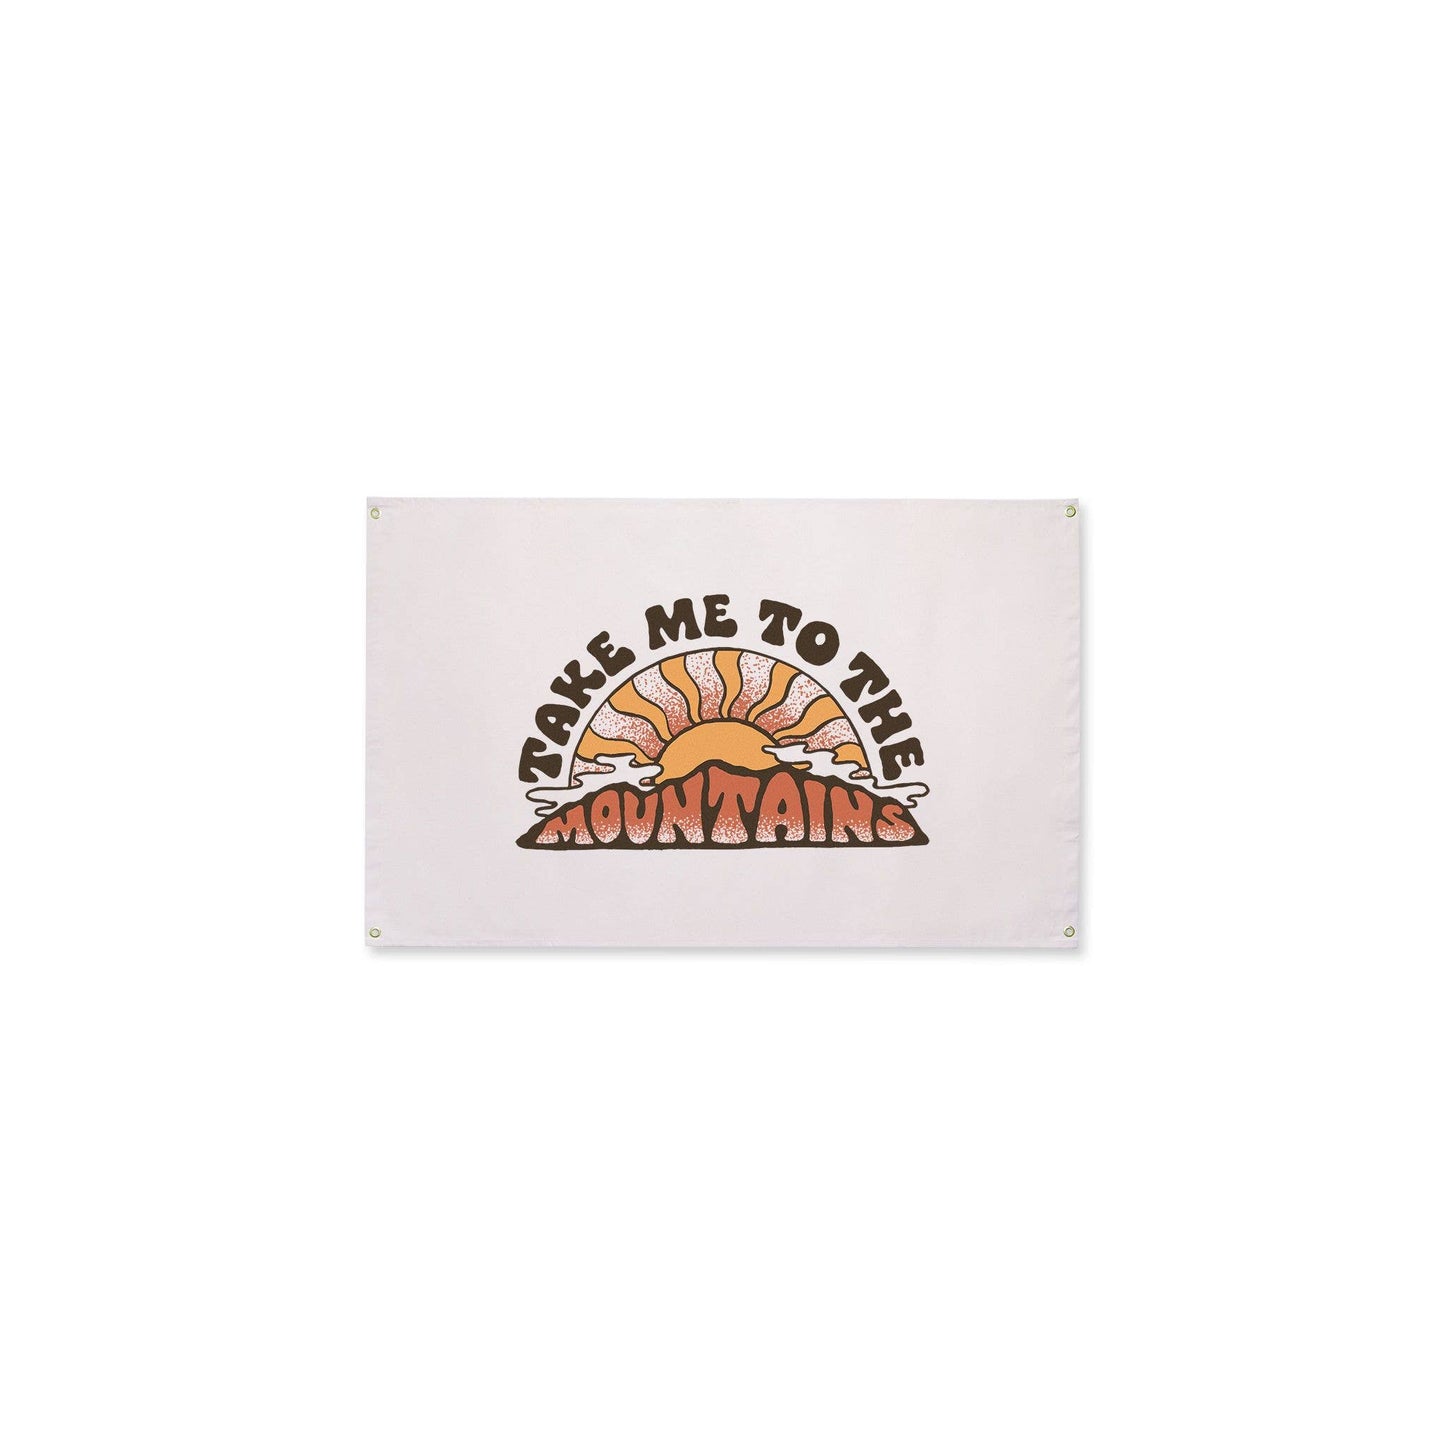 Take me to the Mountains canvas flag by Trek Light Gear